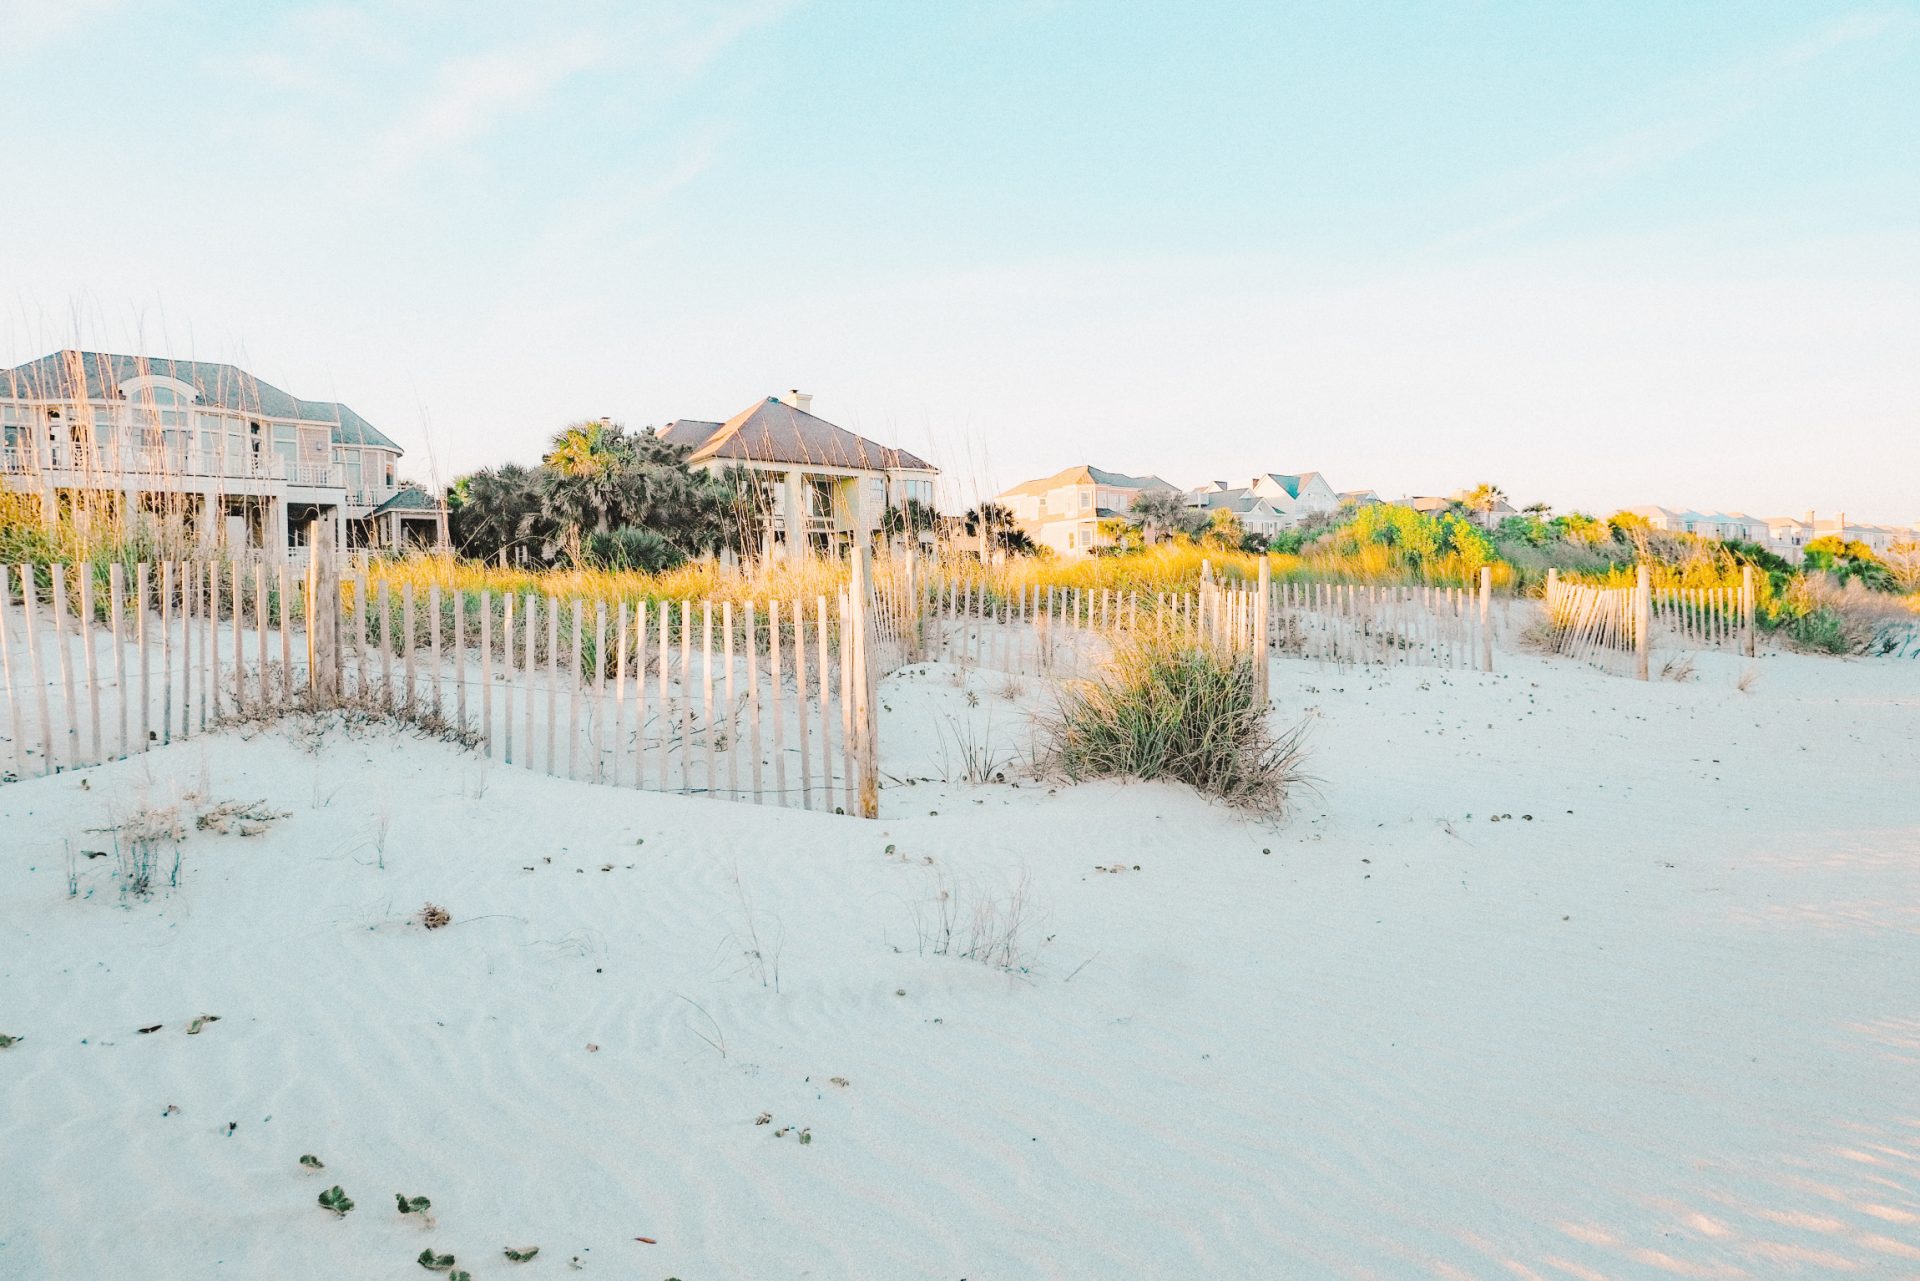 sweetgrass inn, isle of palms, wild dunes resort, resort with pool, vacation South Carolina, Sullivans island, coastal provisions, wedding isle of palms, food, travel guide, where to eat, where to stay, what to do, relax, spa, sweetgrass in resort, coop and frose,